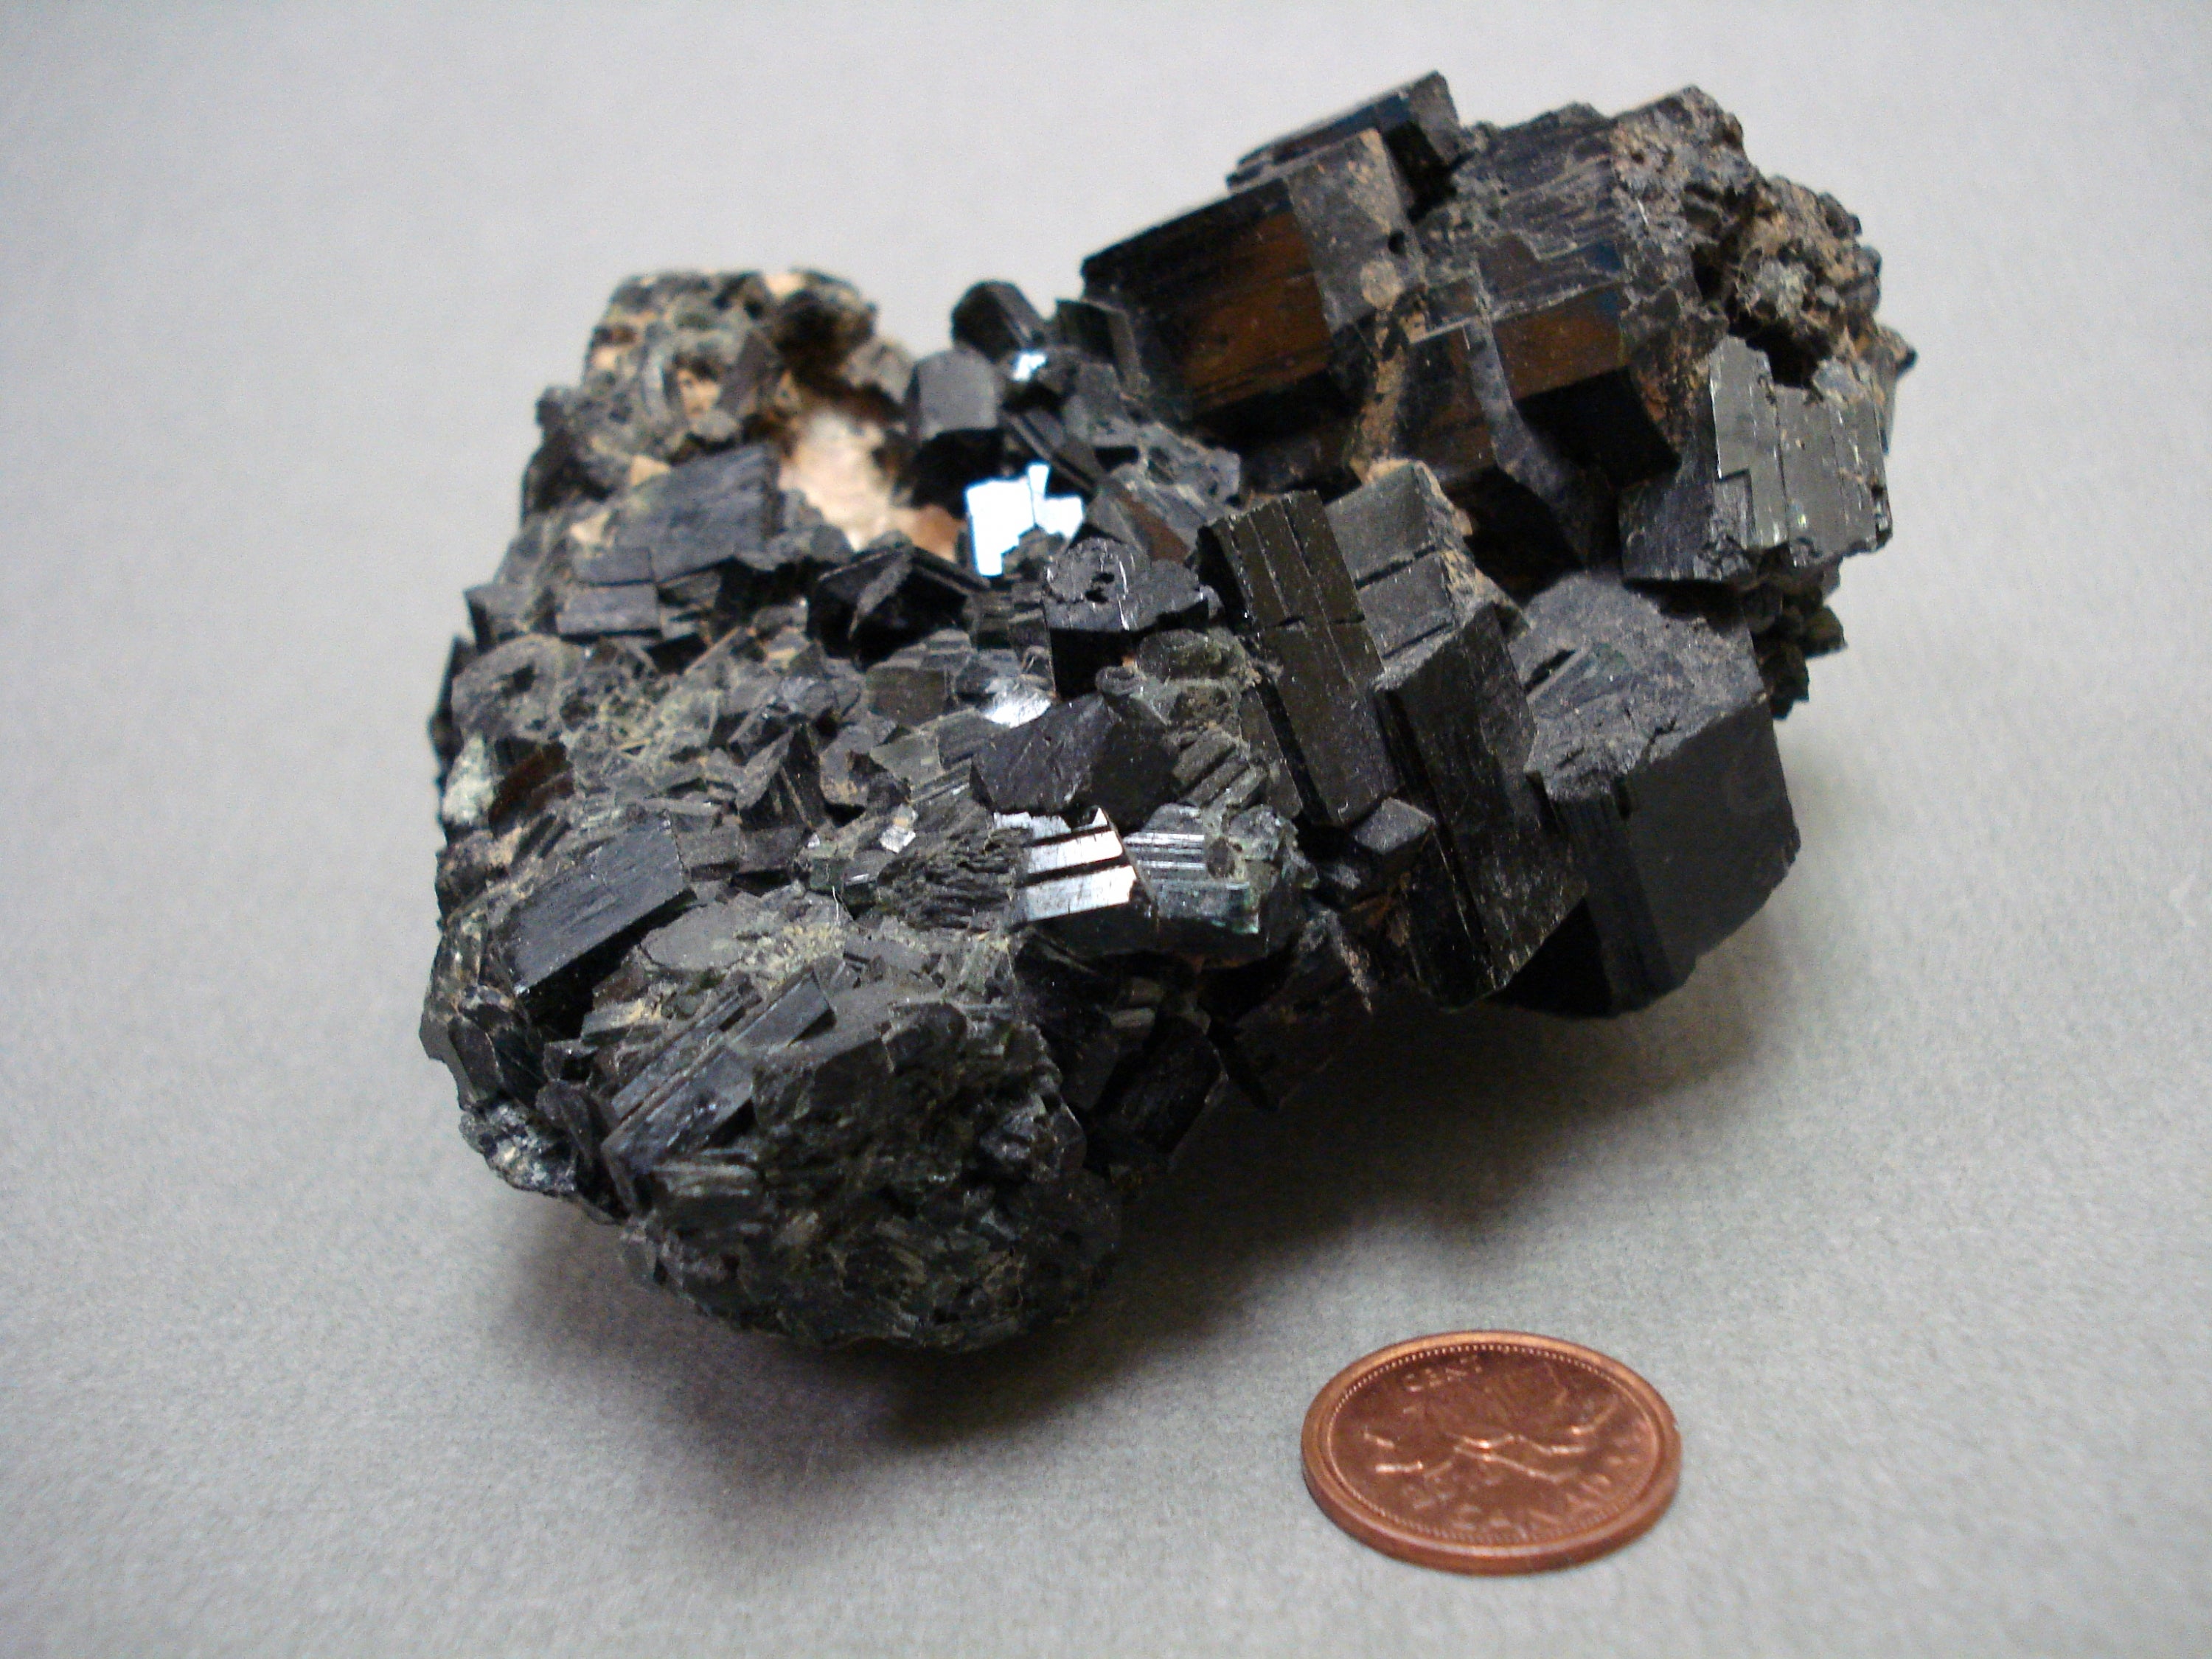 Manganite next to a penny for size comparison